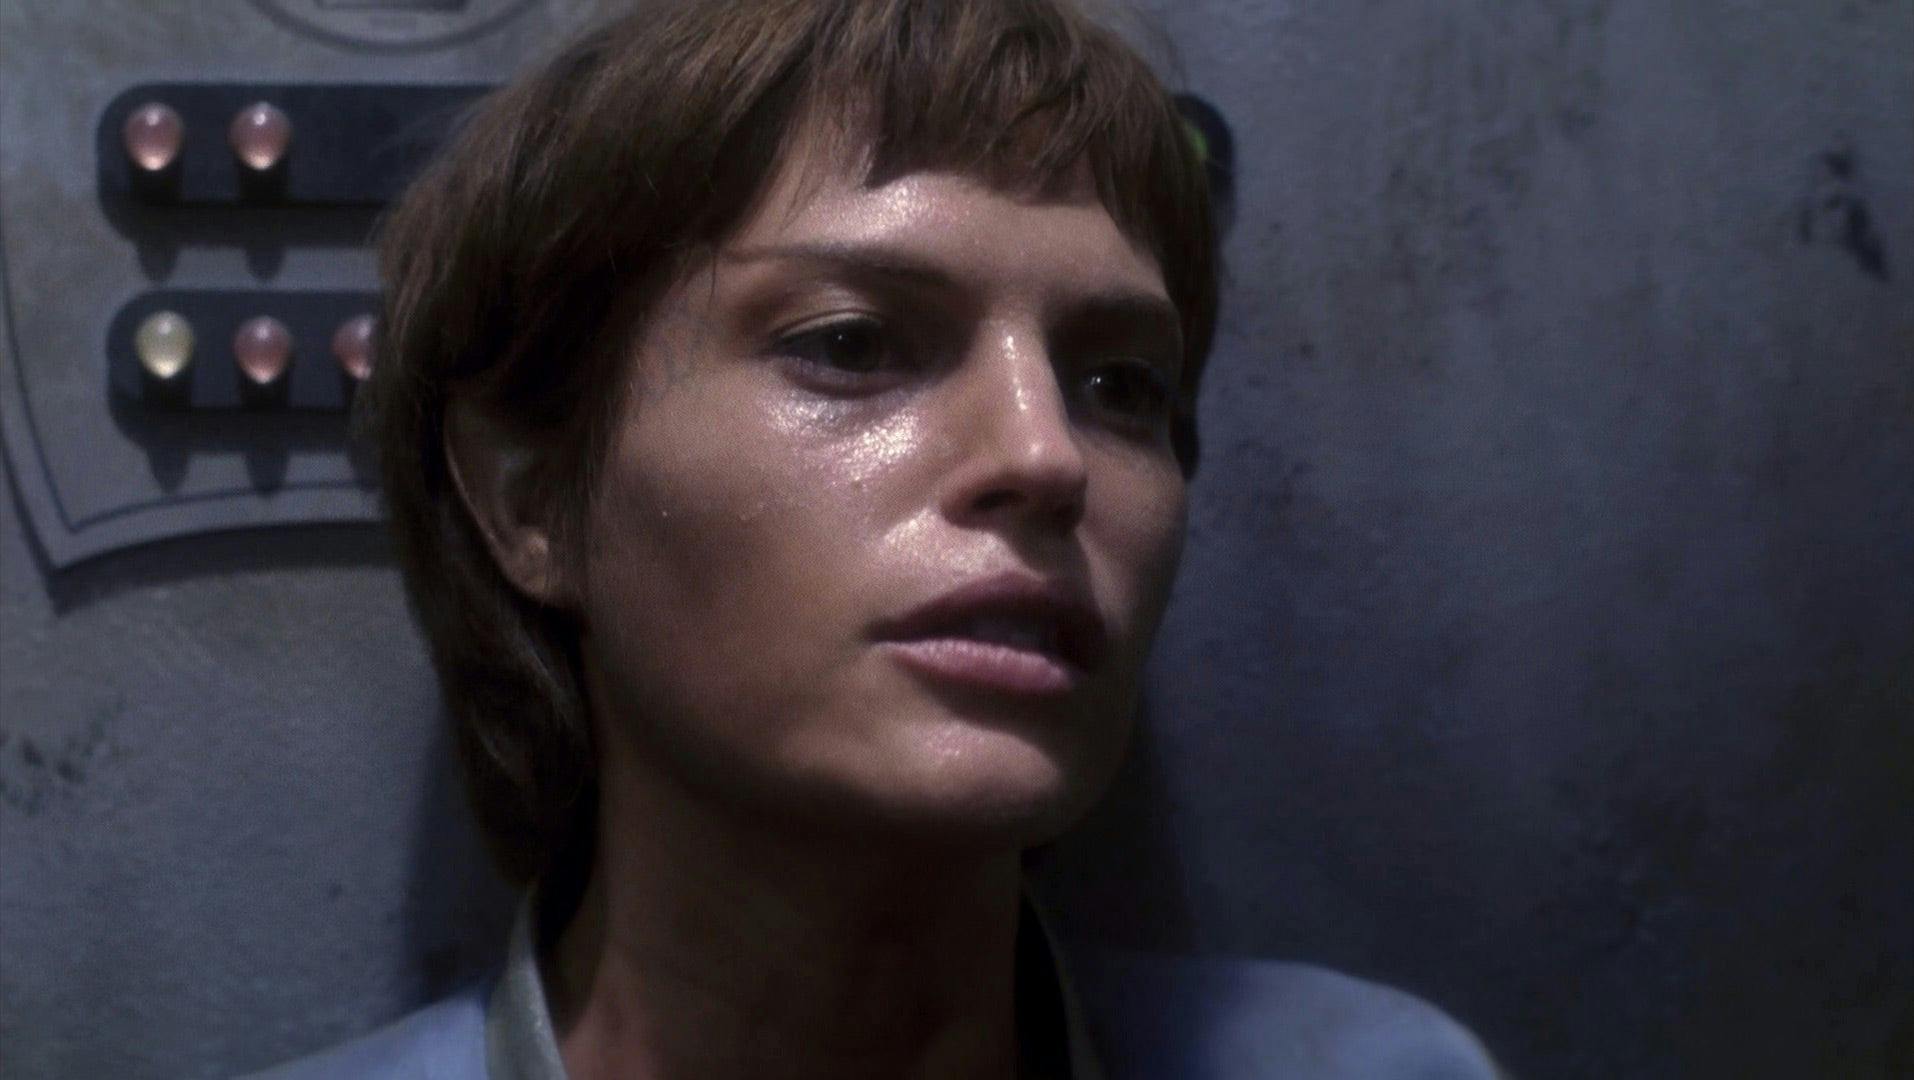 T'Pol is in close up. She looks pale and visibly ill.